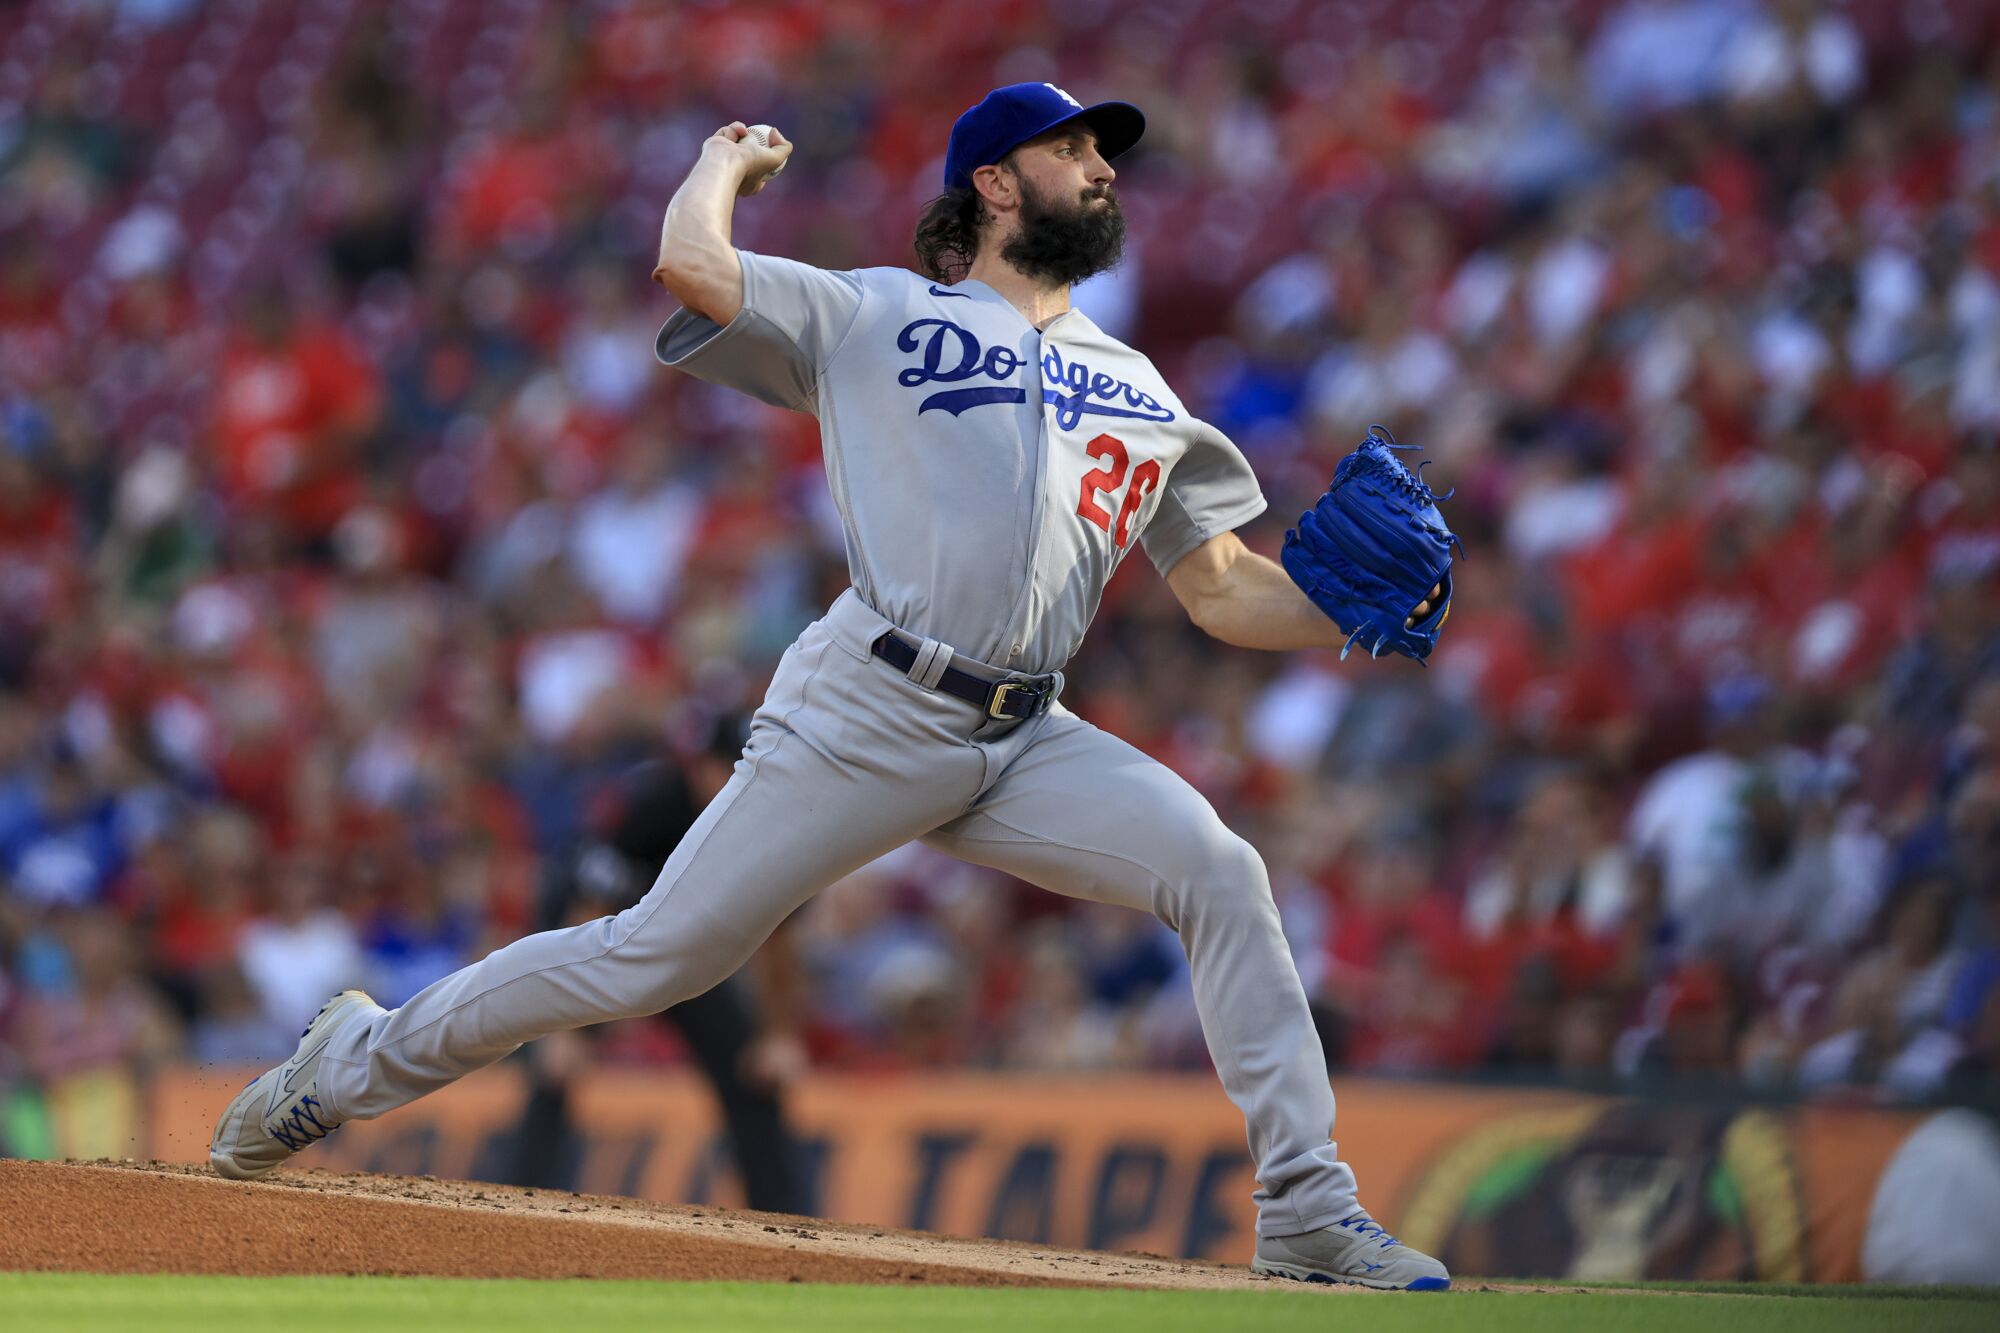 Dodgers pitcher Tony Gonsolin delivers against the Cincinnati Reds.